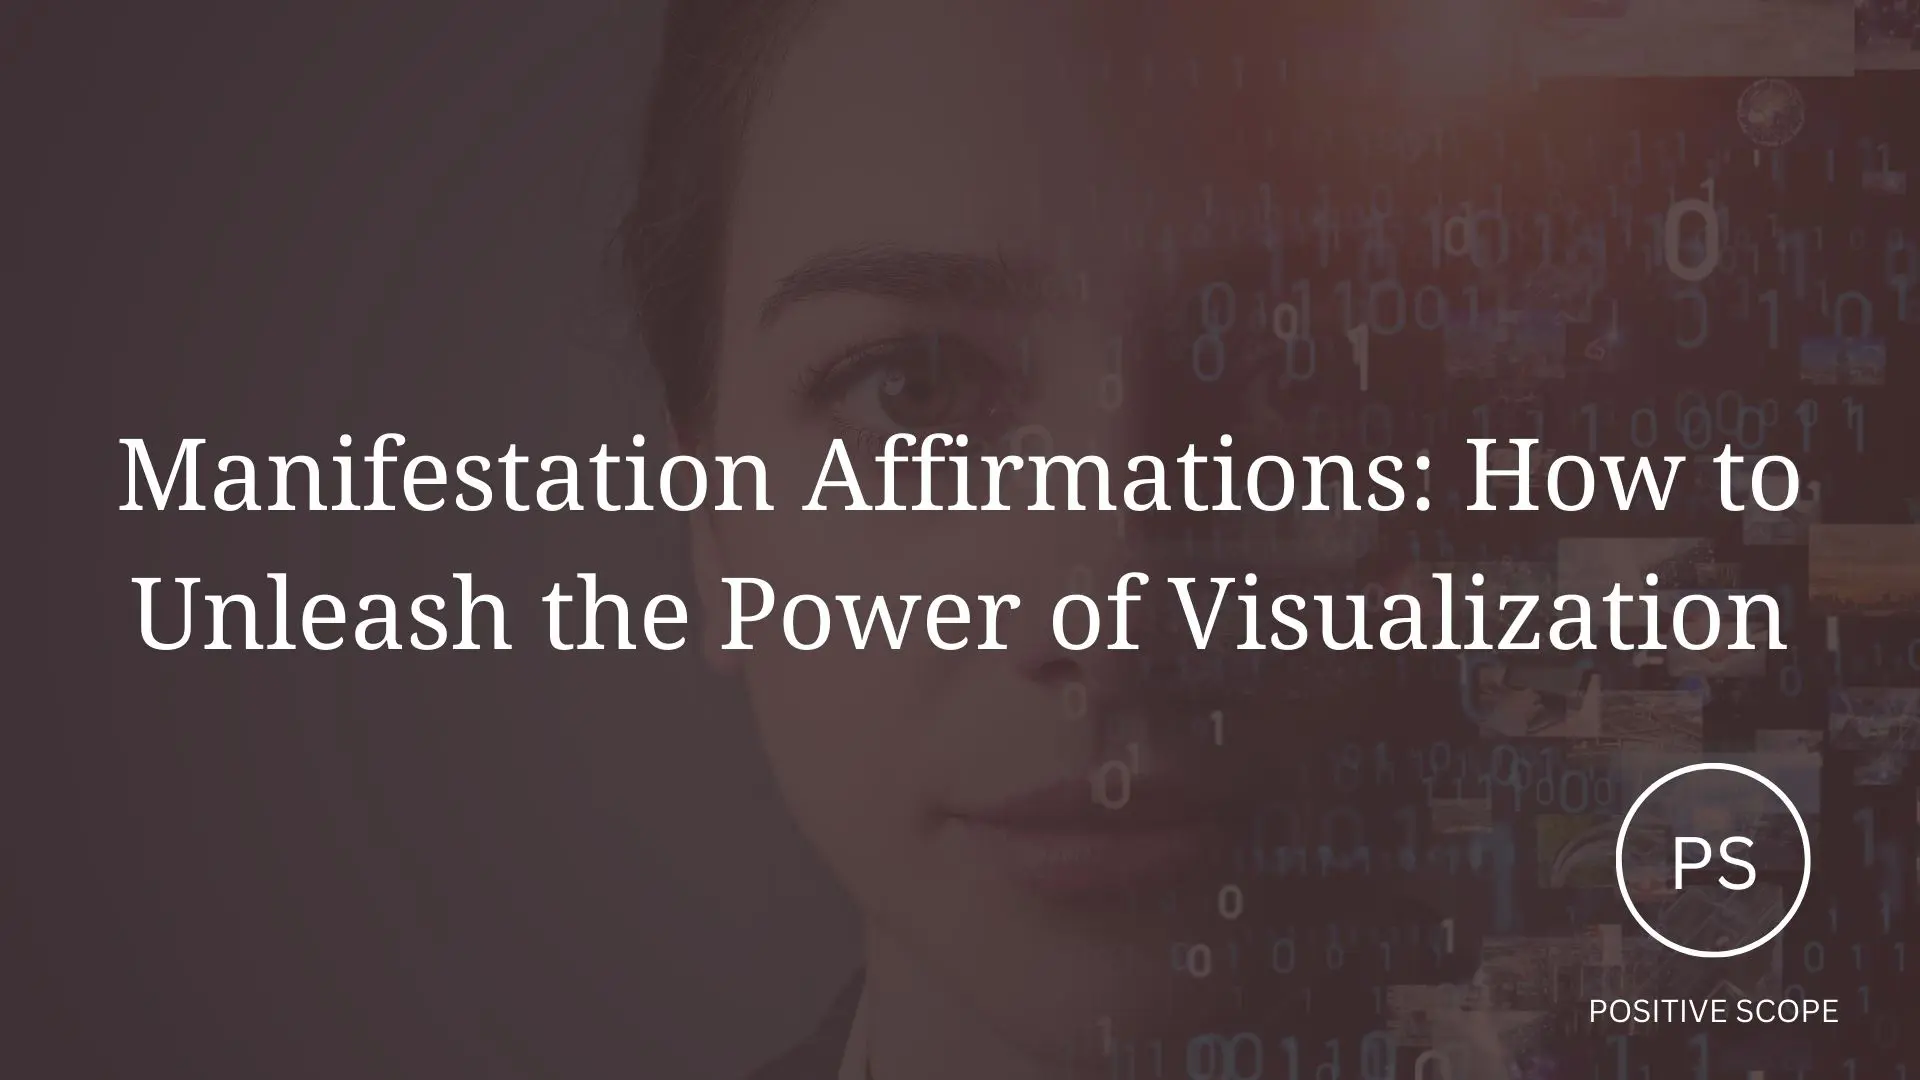 Manifestation Affirmations: How to Unleash the Power of Visualization